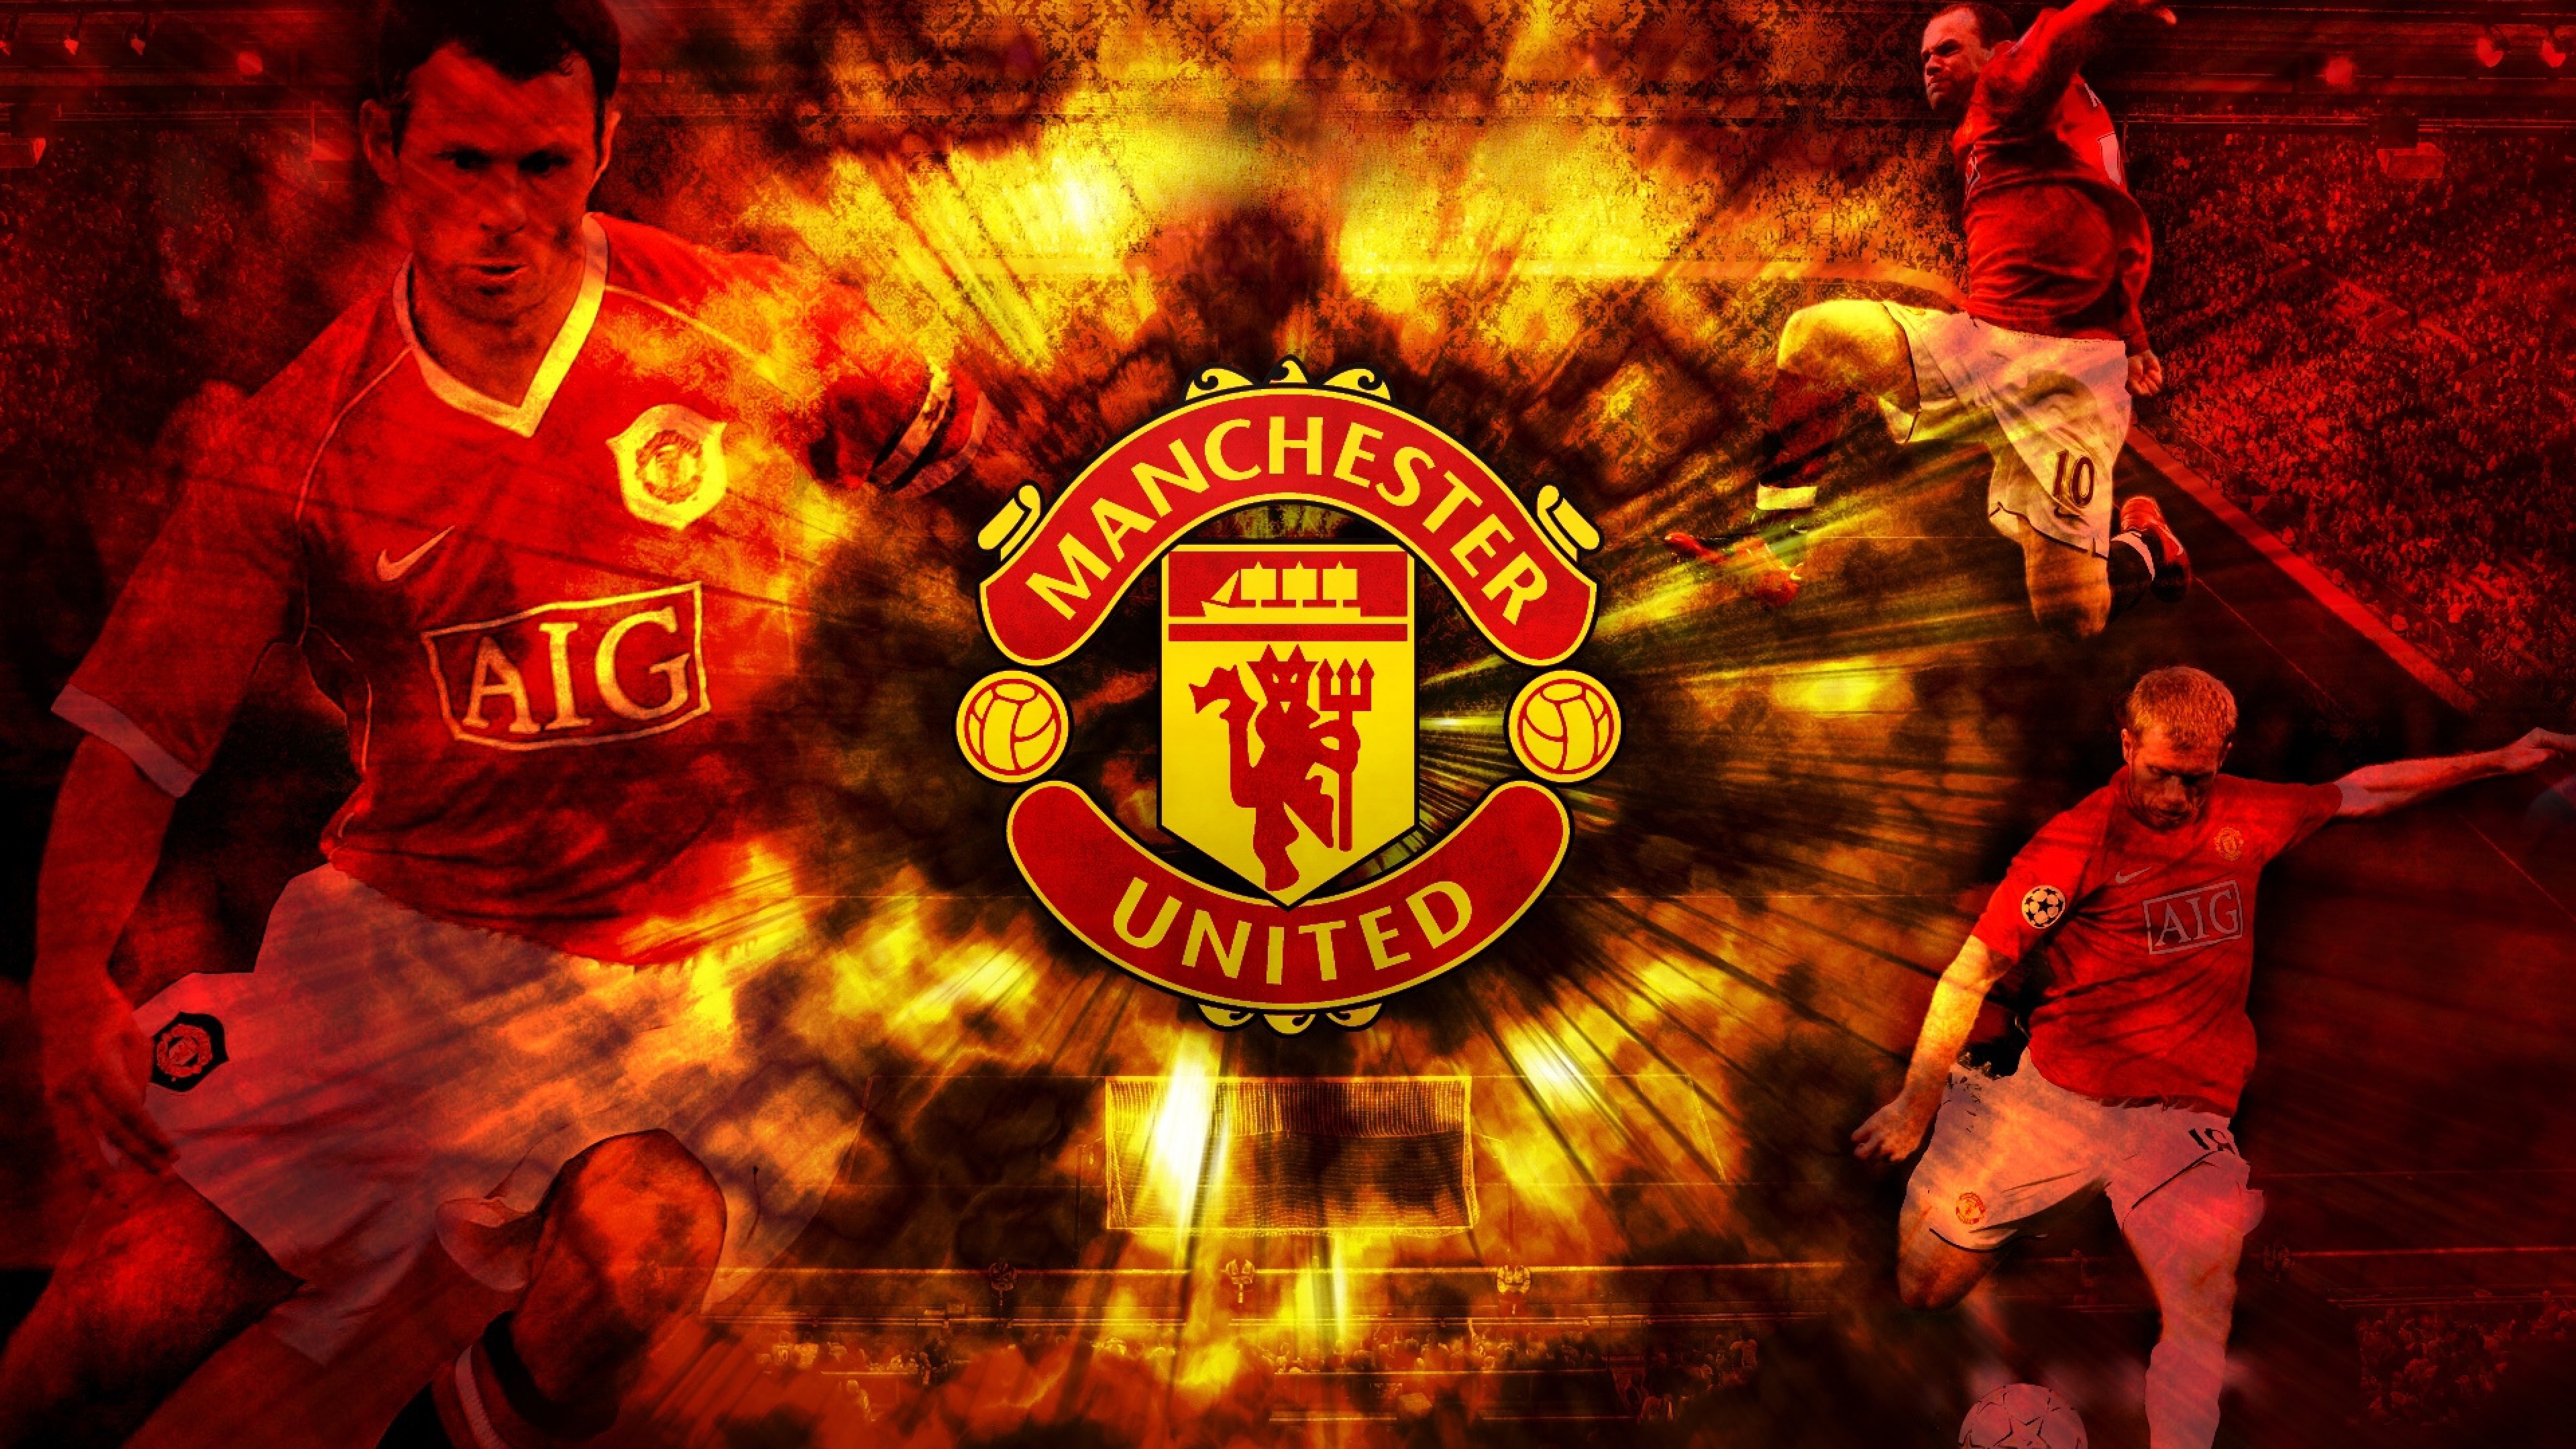 Manchester United Wallpapers - Top 35 Best Manchester United Backgrounds  Download